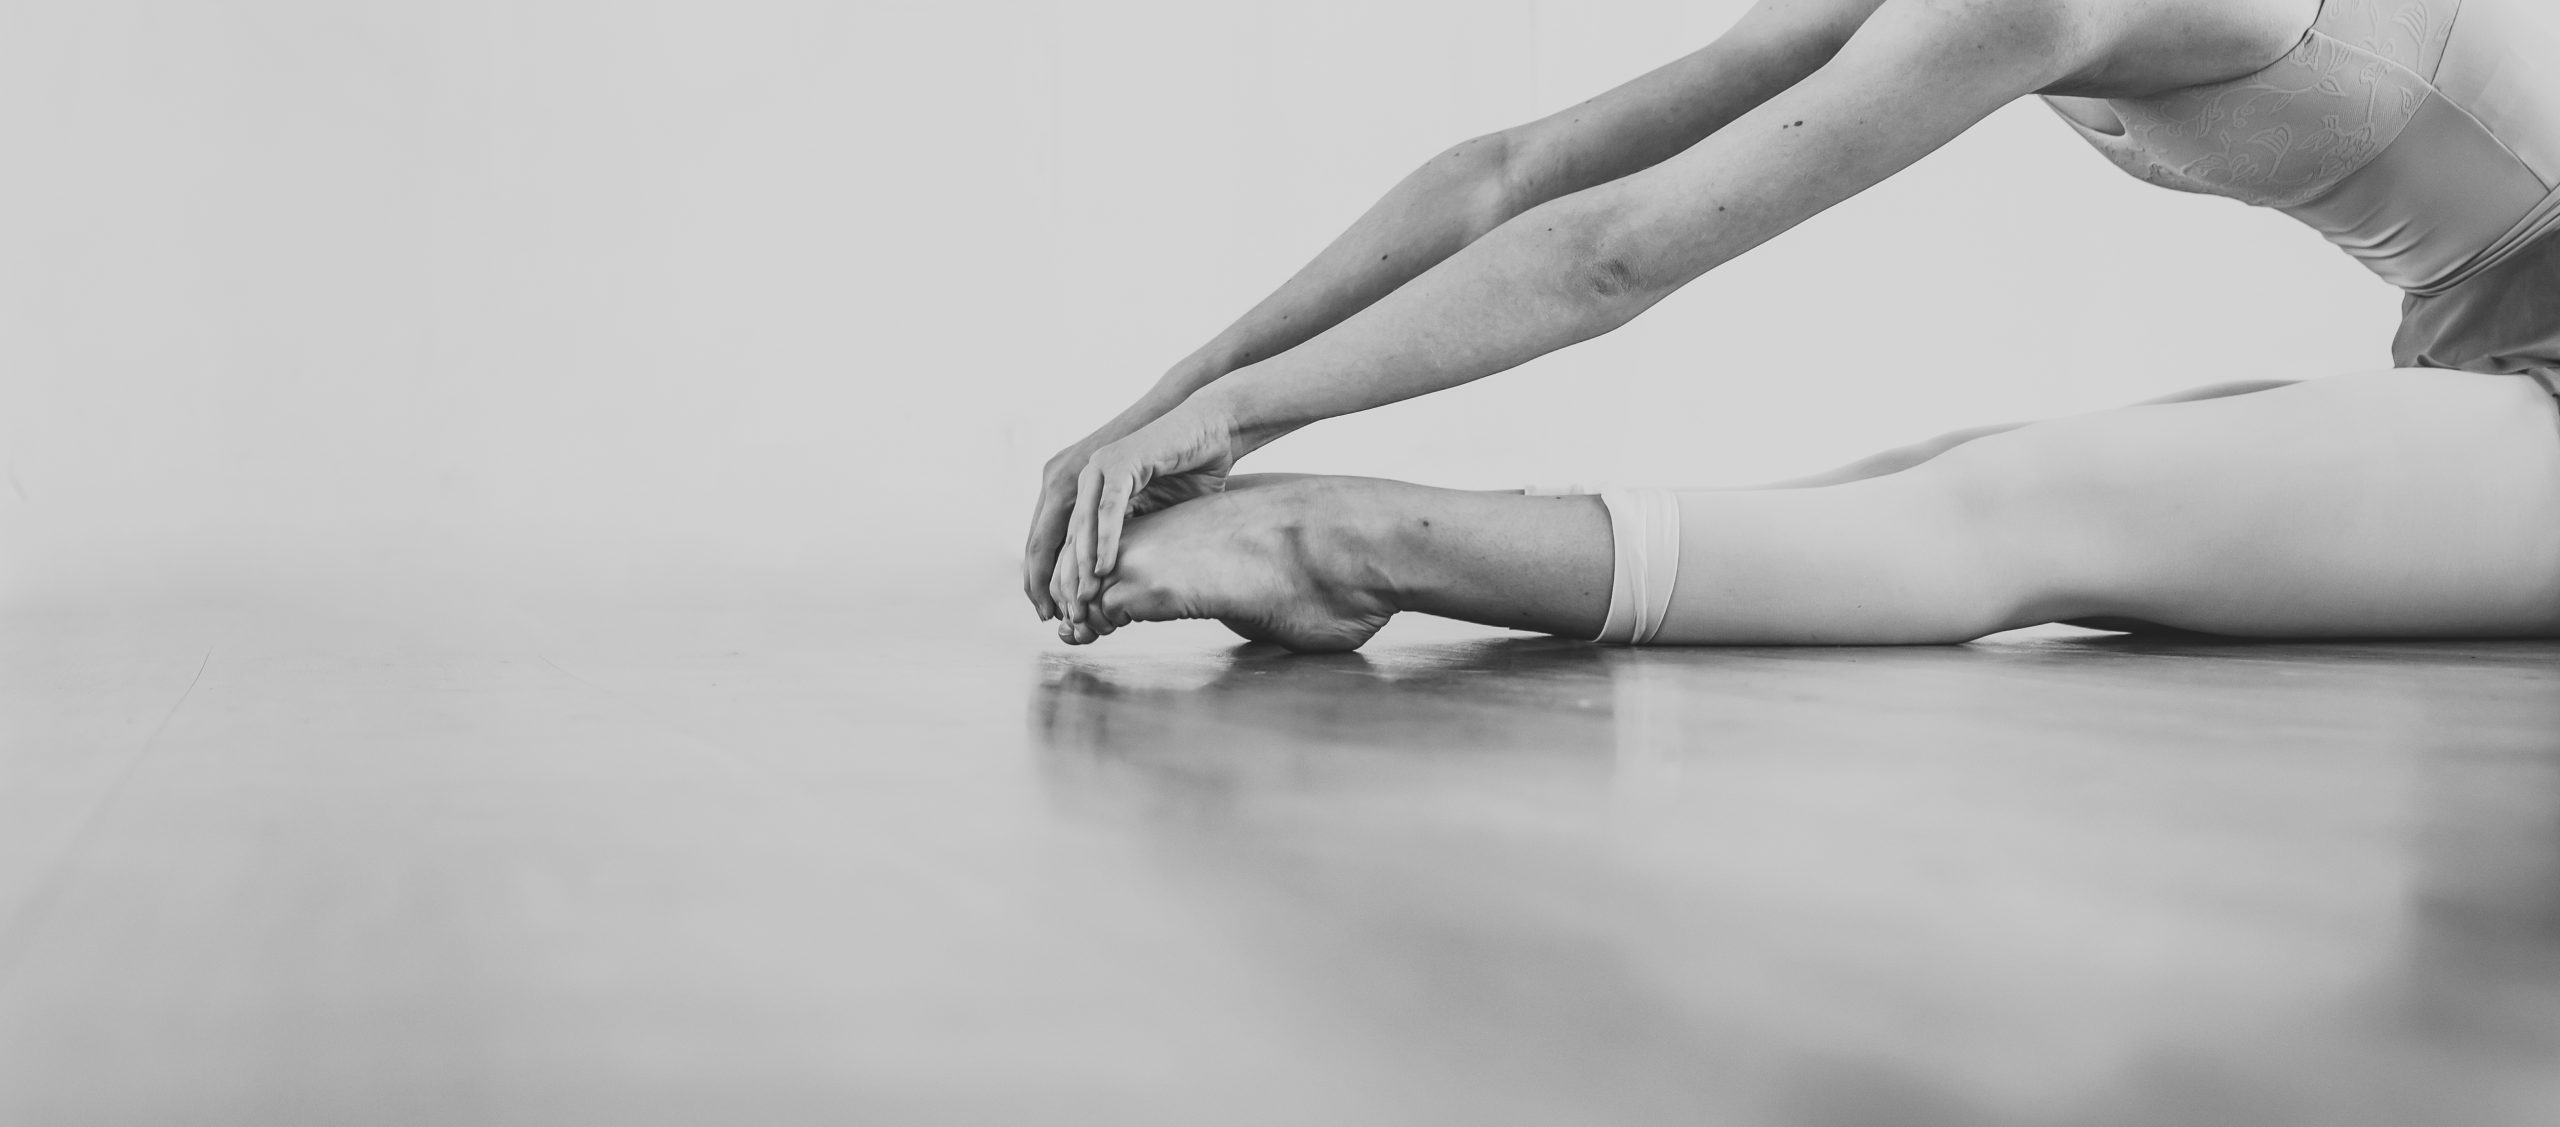 The ballet blog - Why stress fractures are a problem for young